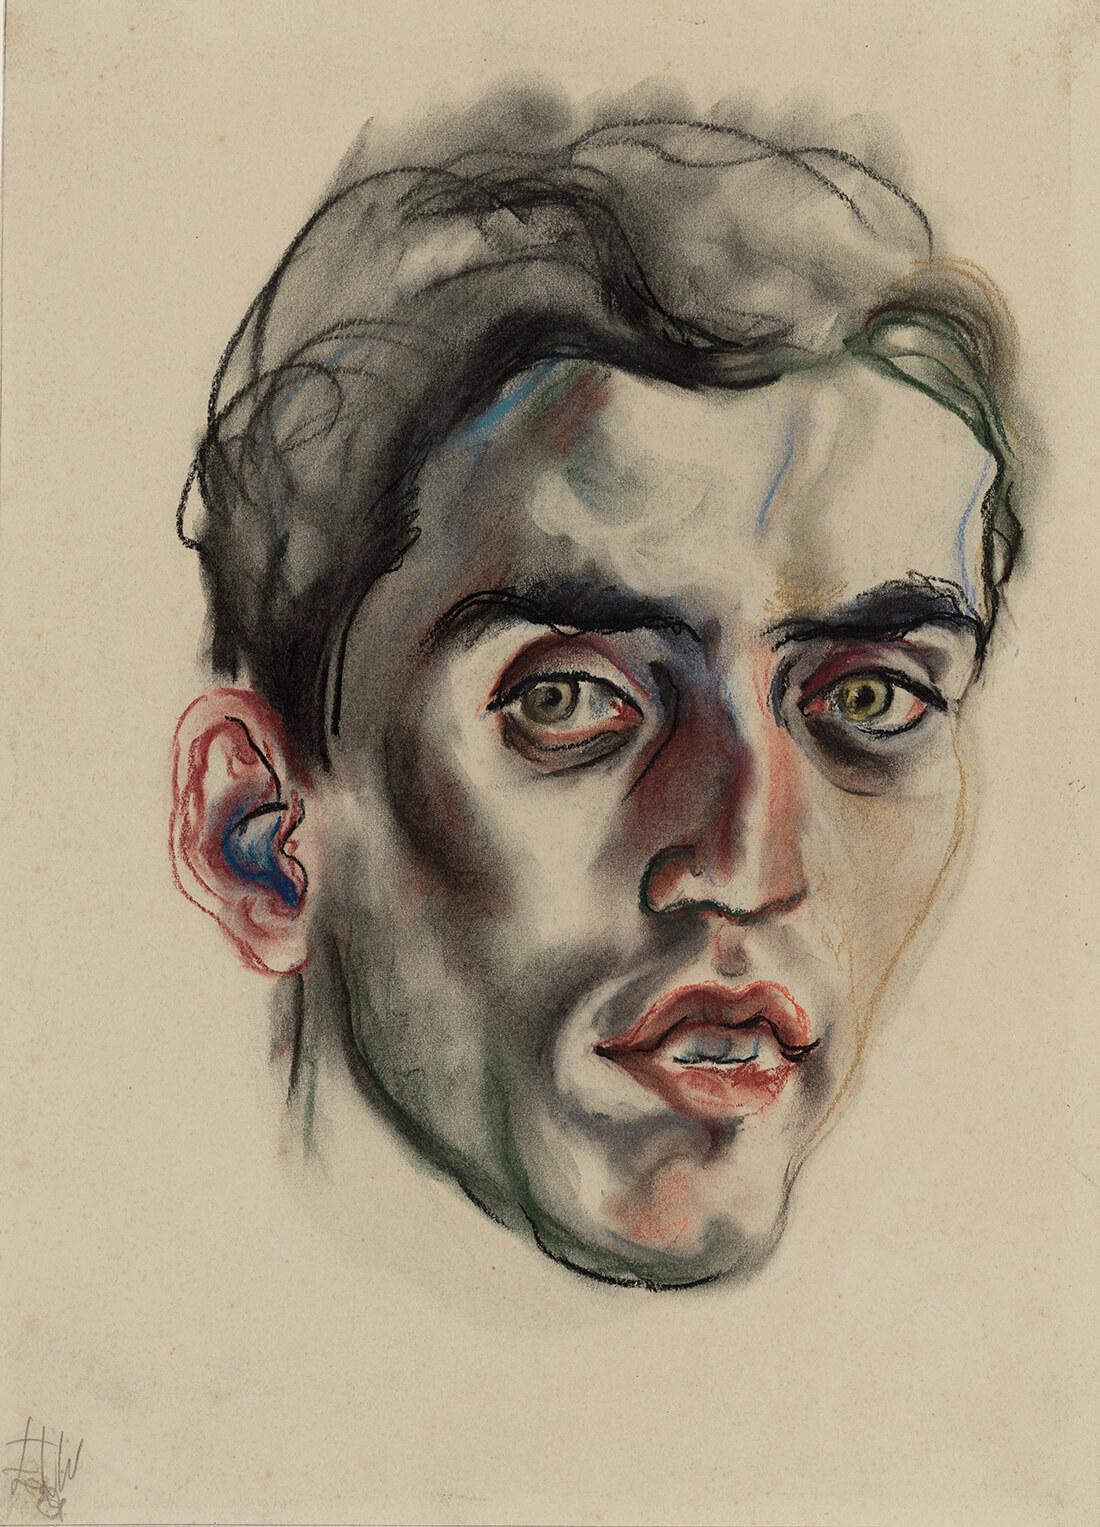 Pastel drawing portrait of the head of a dark haired and short haired man